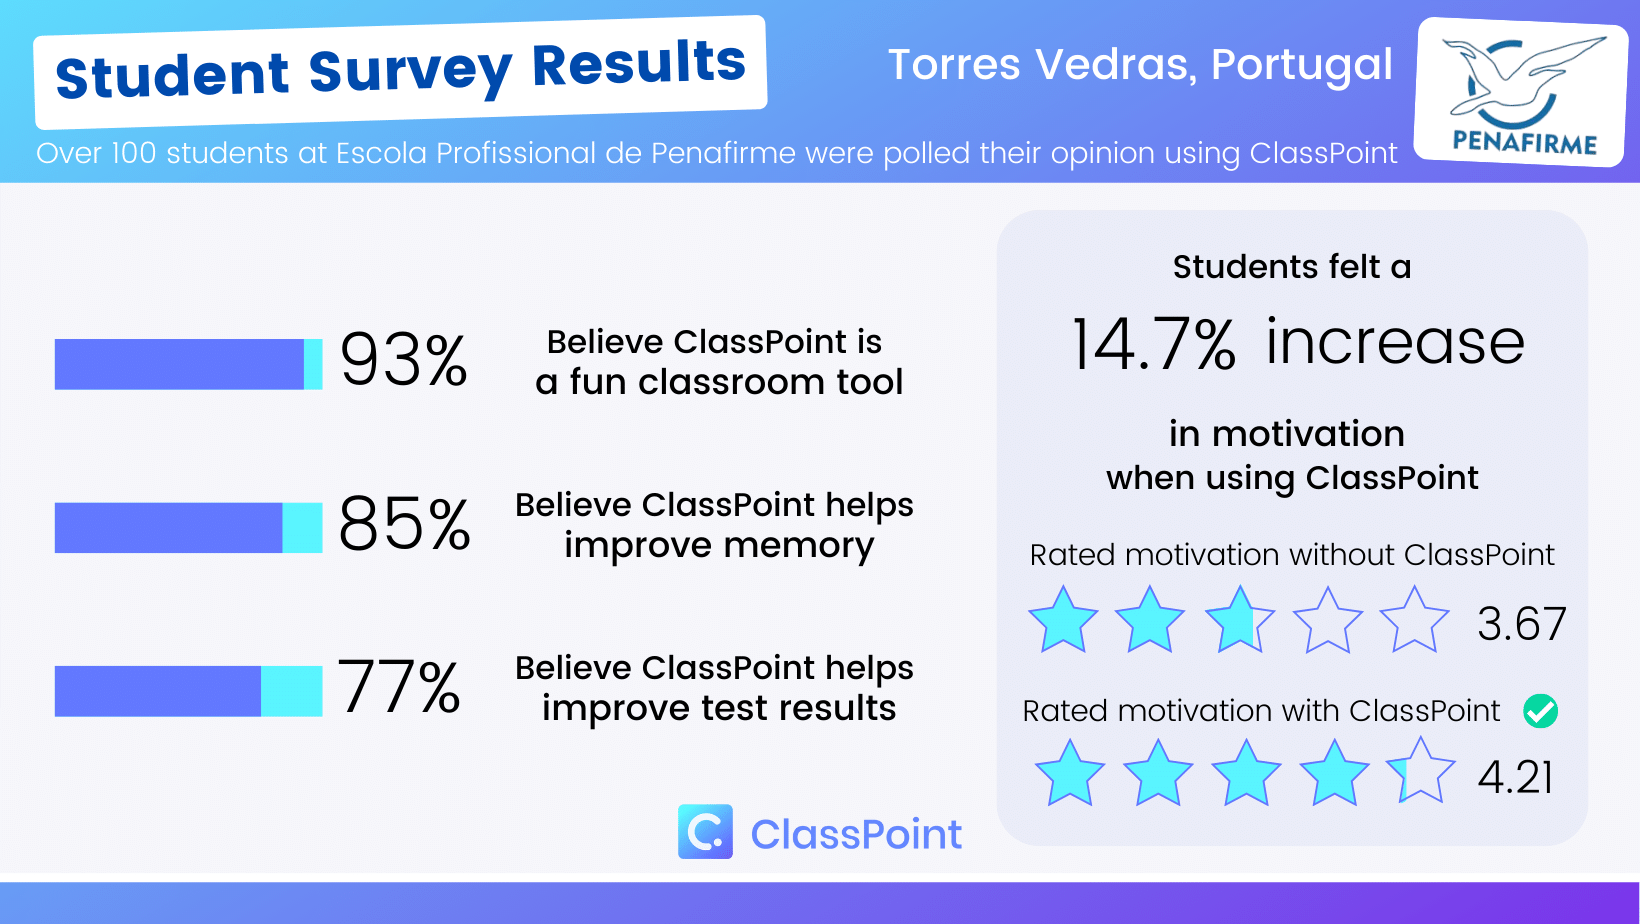 Penfirme school case study student survey results